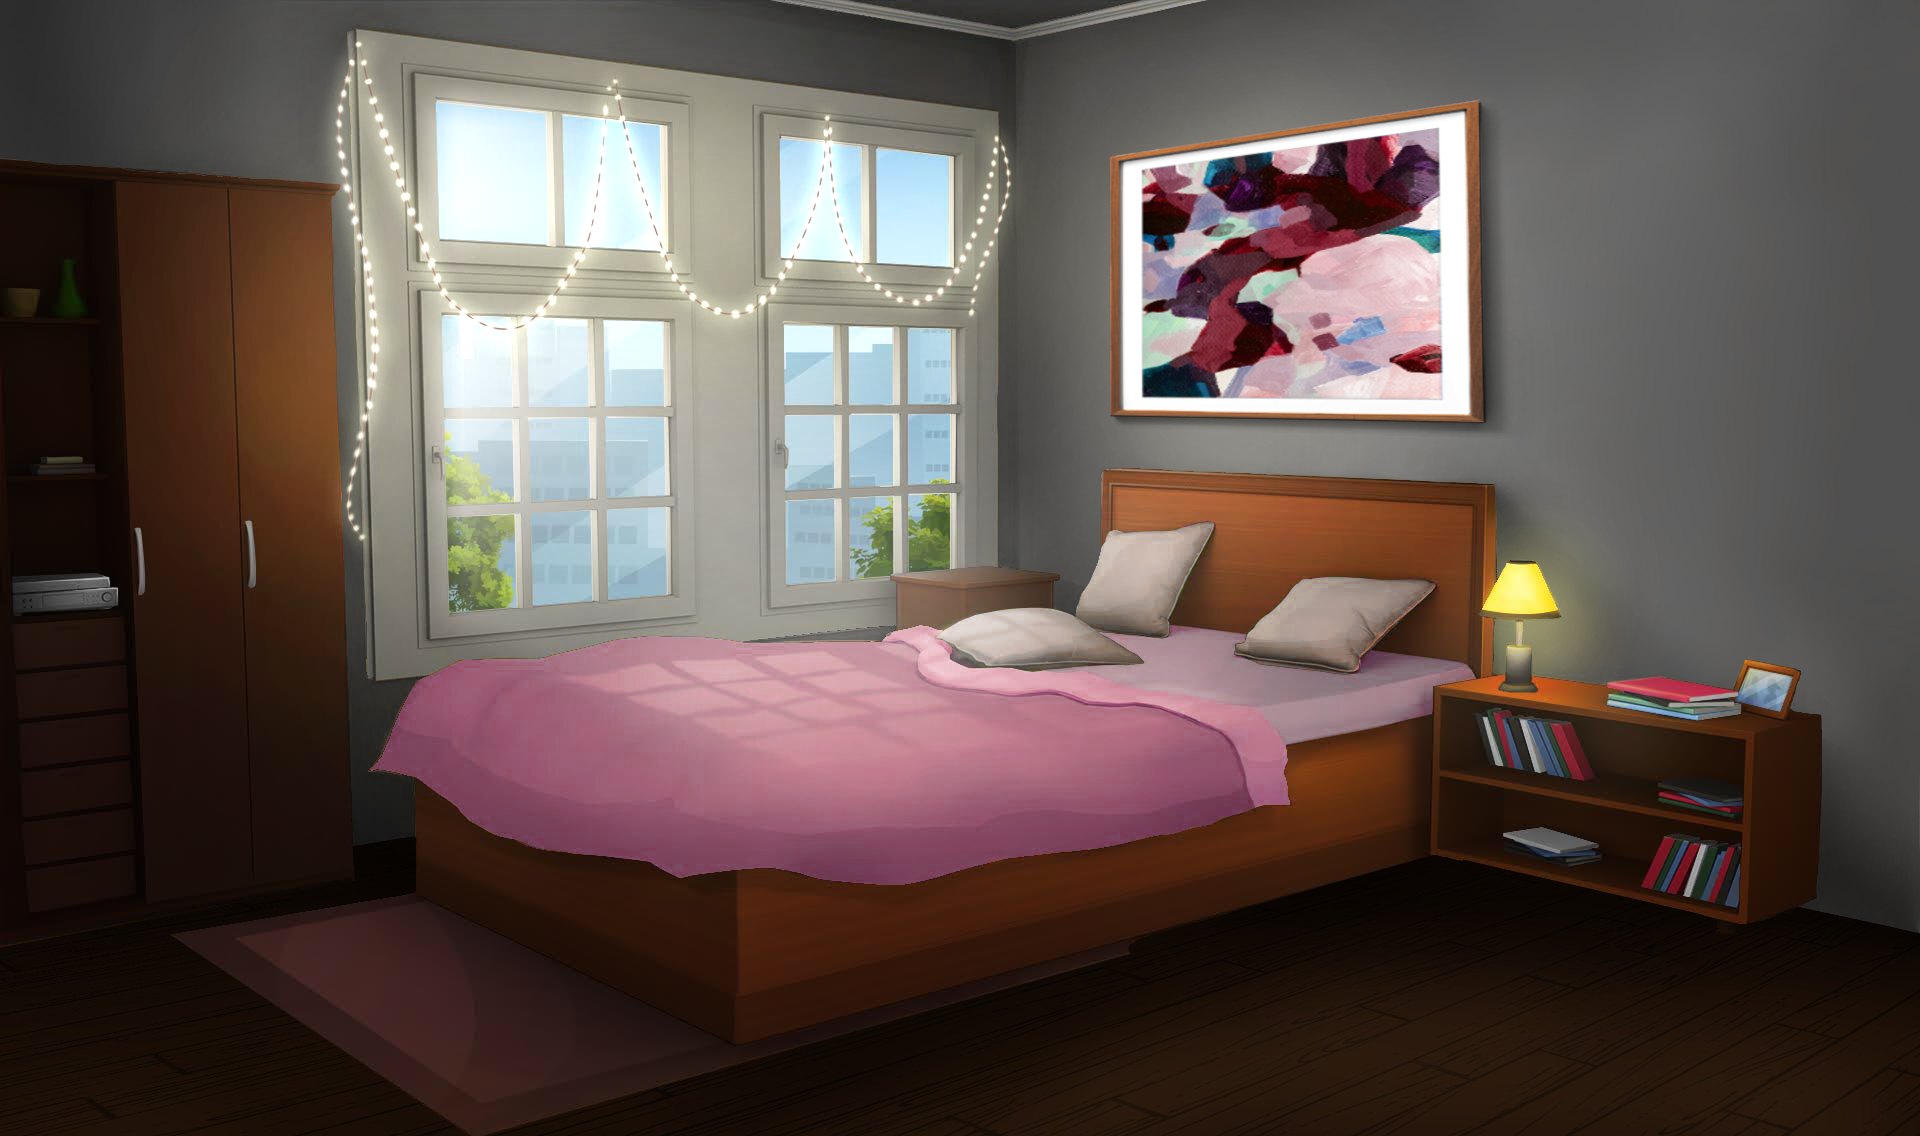 Bedroom Background  hazarqs Kofi Shop  Kofi  Where creators get  support from fans through donations memberships shop sales and more The  original Buy Me a Coffee Page